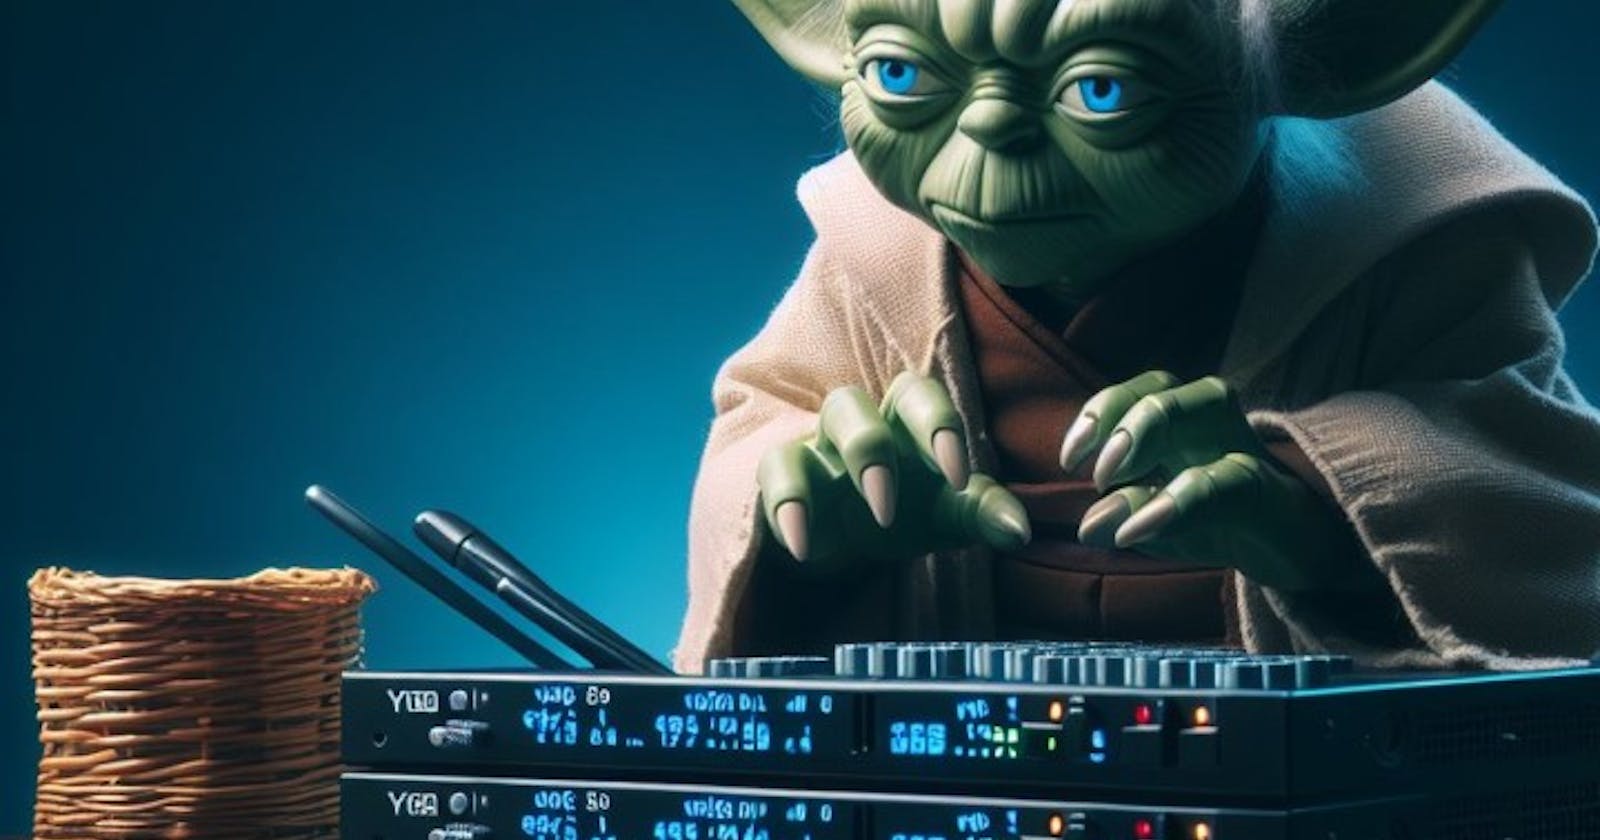 The Force of DNS: 8.8.8.8 No Longer, The Greatest Resolver Is